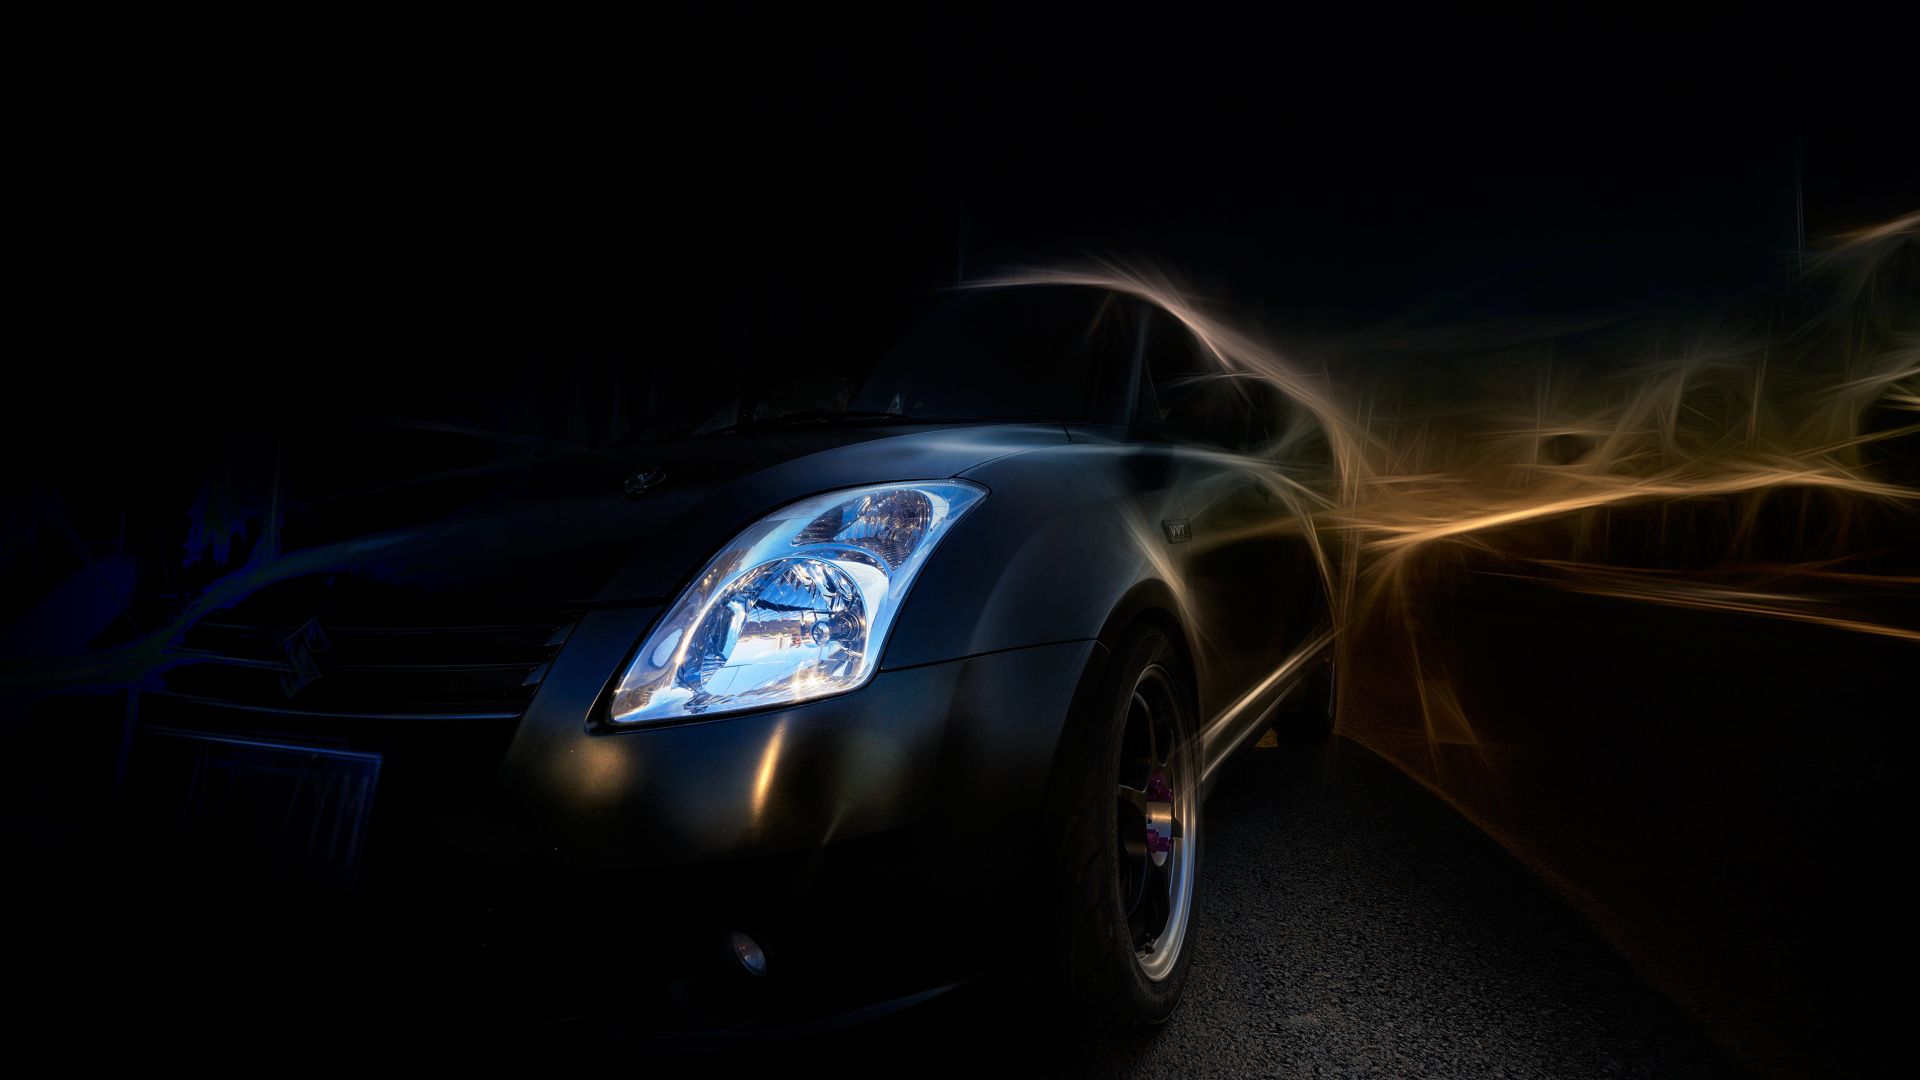 Car Lights Photos Download The BEST Free Car Lights Stock Photos  HD  Images